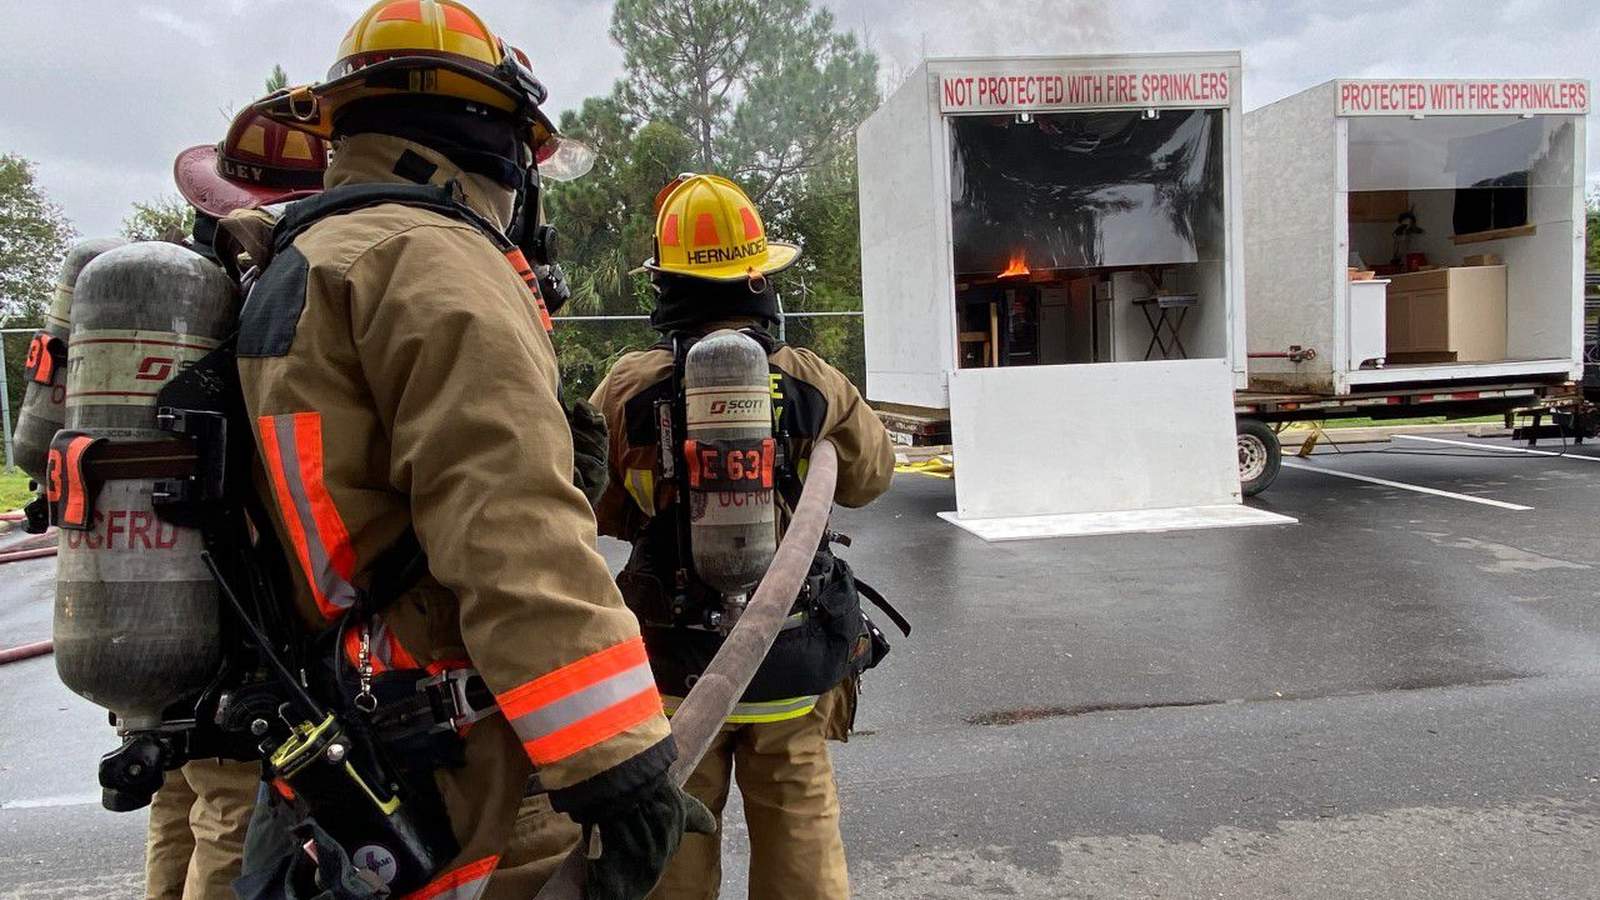 Here’s how Central Florida firefighters are sparking conversation about fire safety